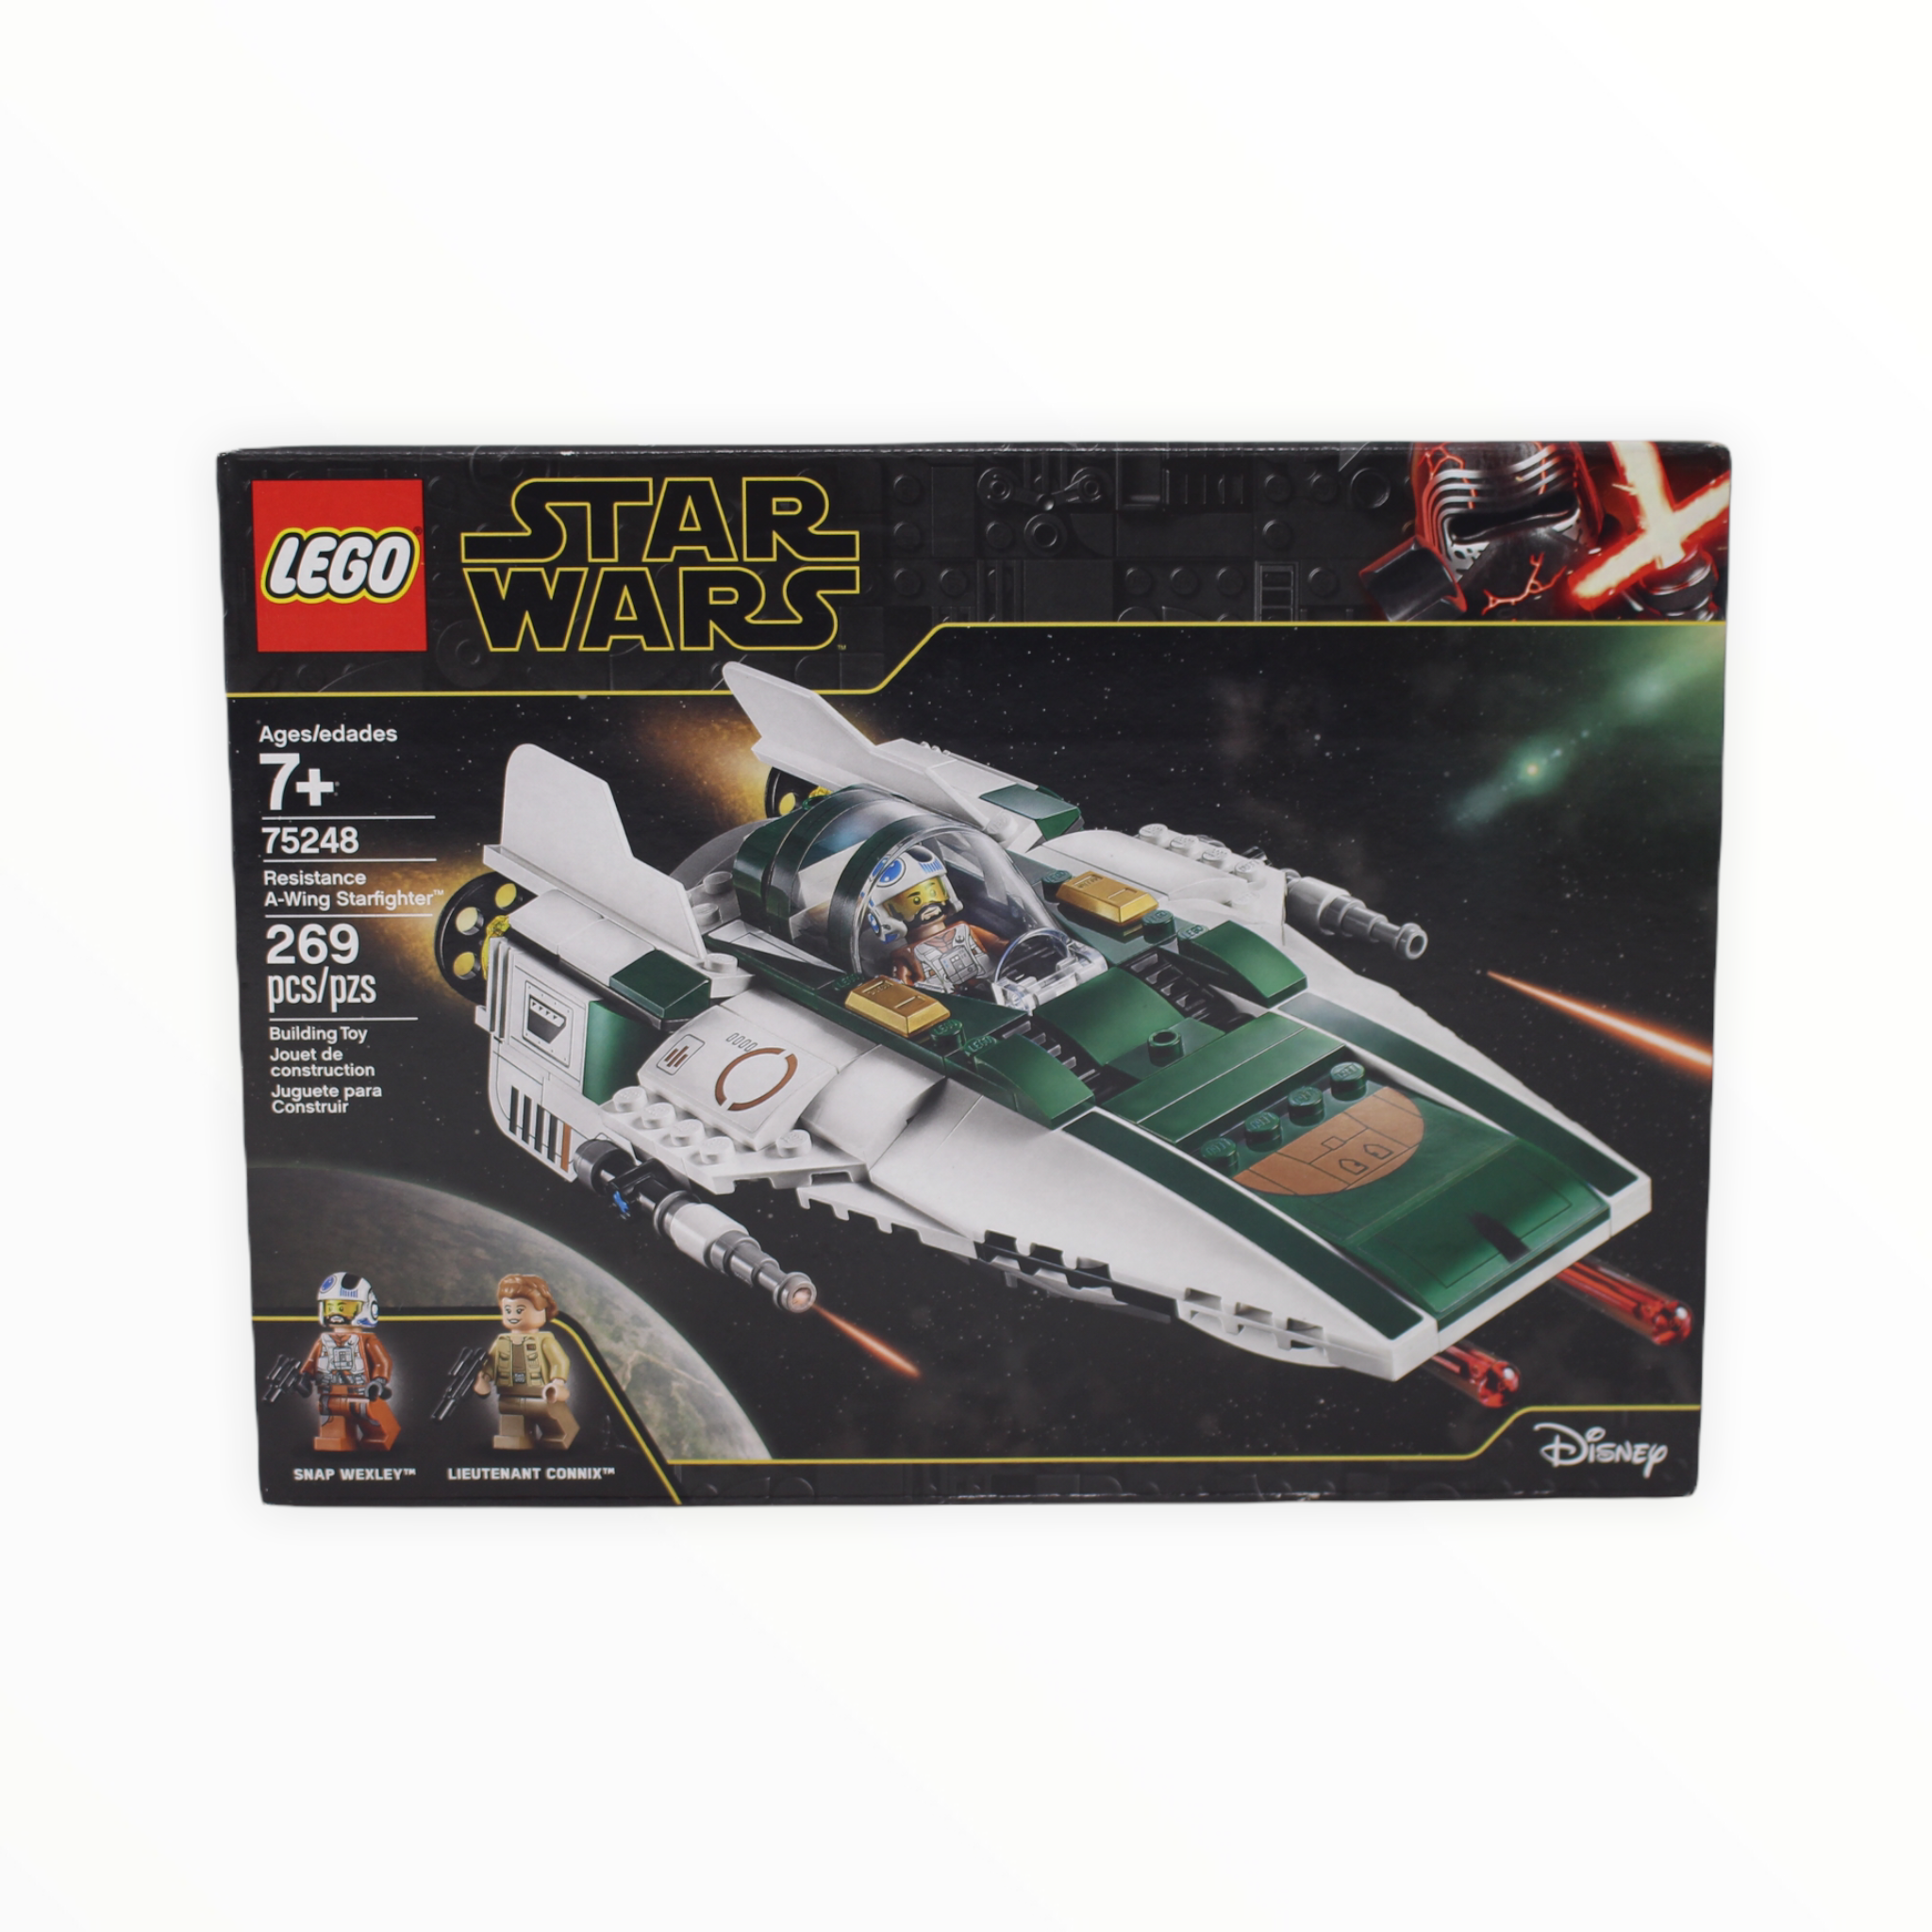 Retired Set 75248 Star Wars Resistance A-Wing Starfighter